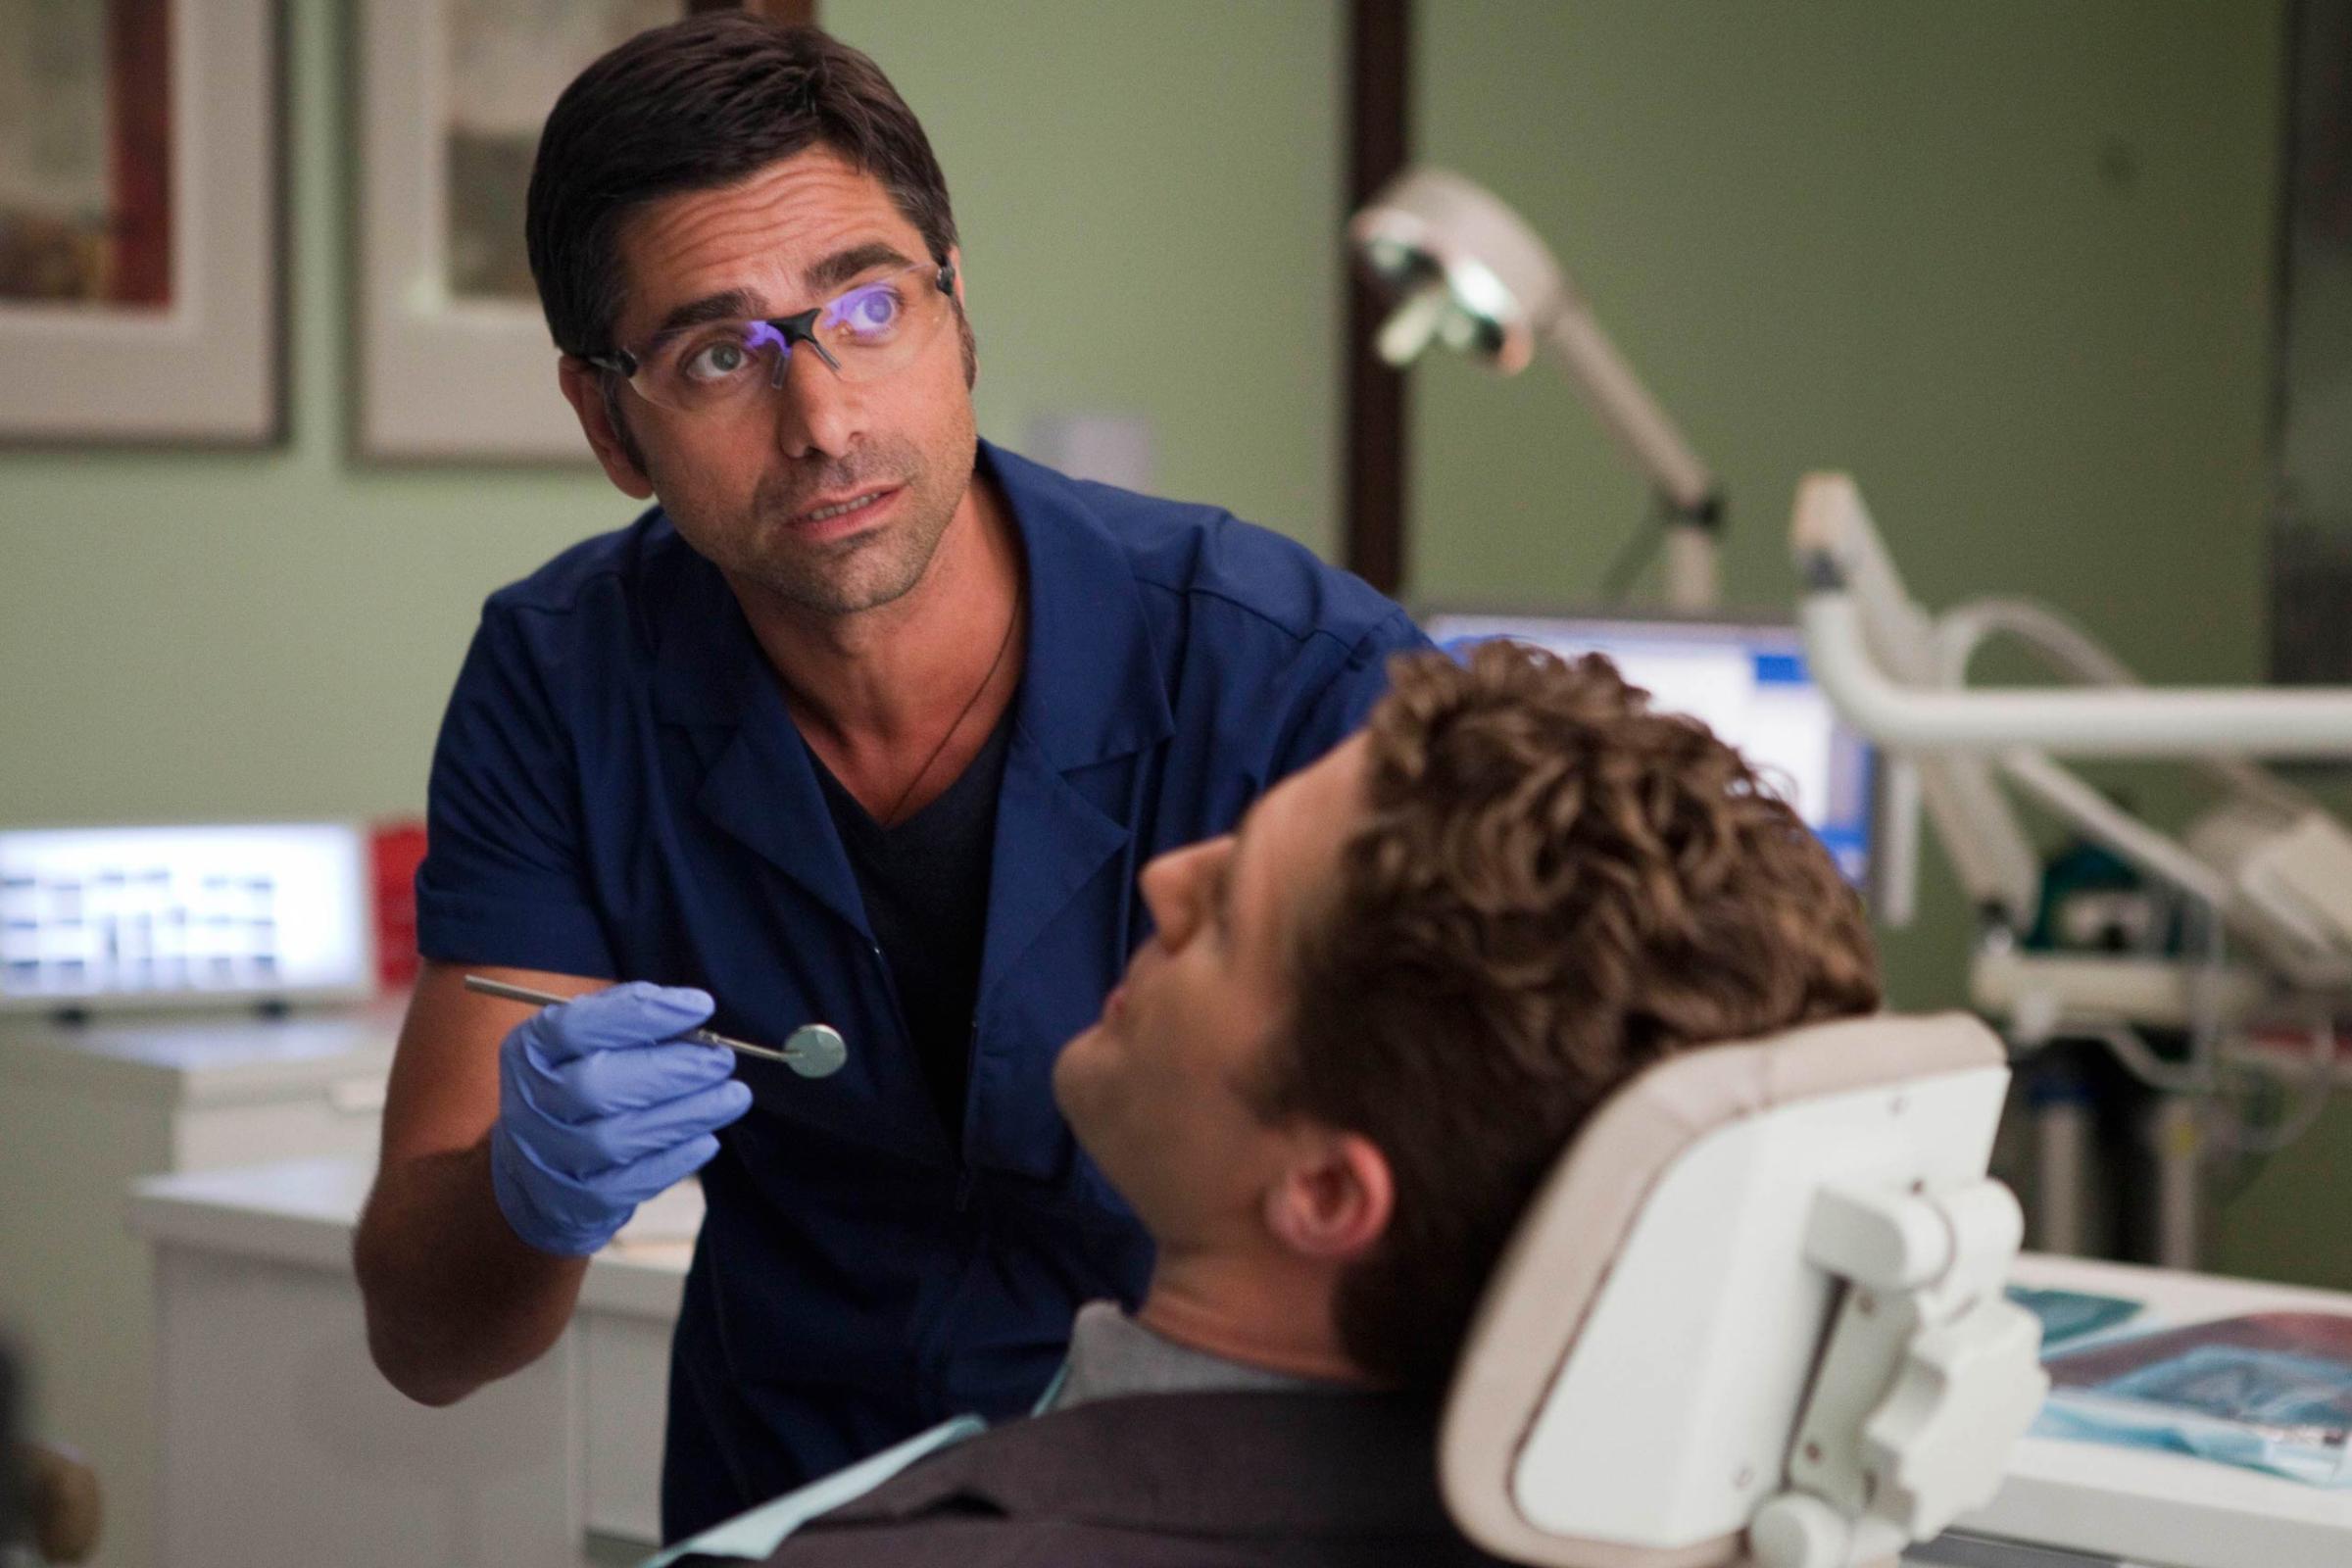 GLEE: Dr. Carl (guest star John Stamos, L) checks out Will's (Matthew Morrison, R) dental hygiene in the "Britney/Brittany" episode of GLEE airing Tuesay, Sept. 28 (8:00-9:00 PM ET/PT) on FOX. ©2010 Fox Broadcasting Co. CR: Adam Rose/FOX